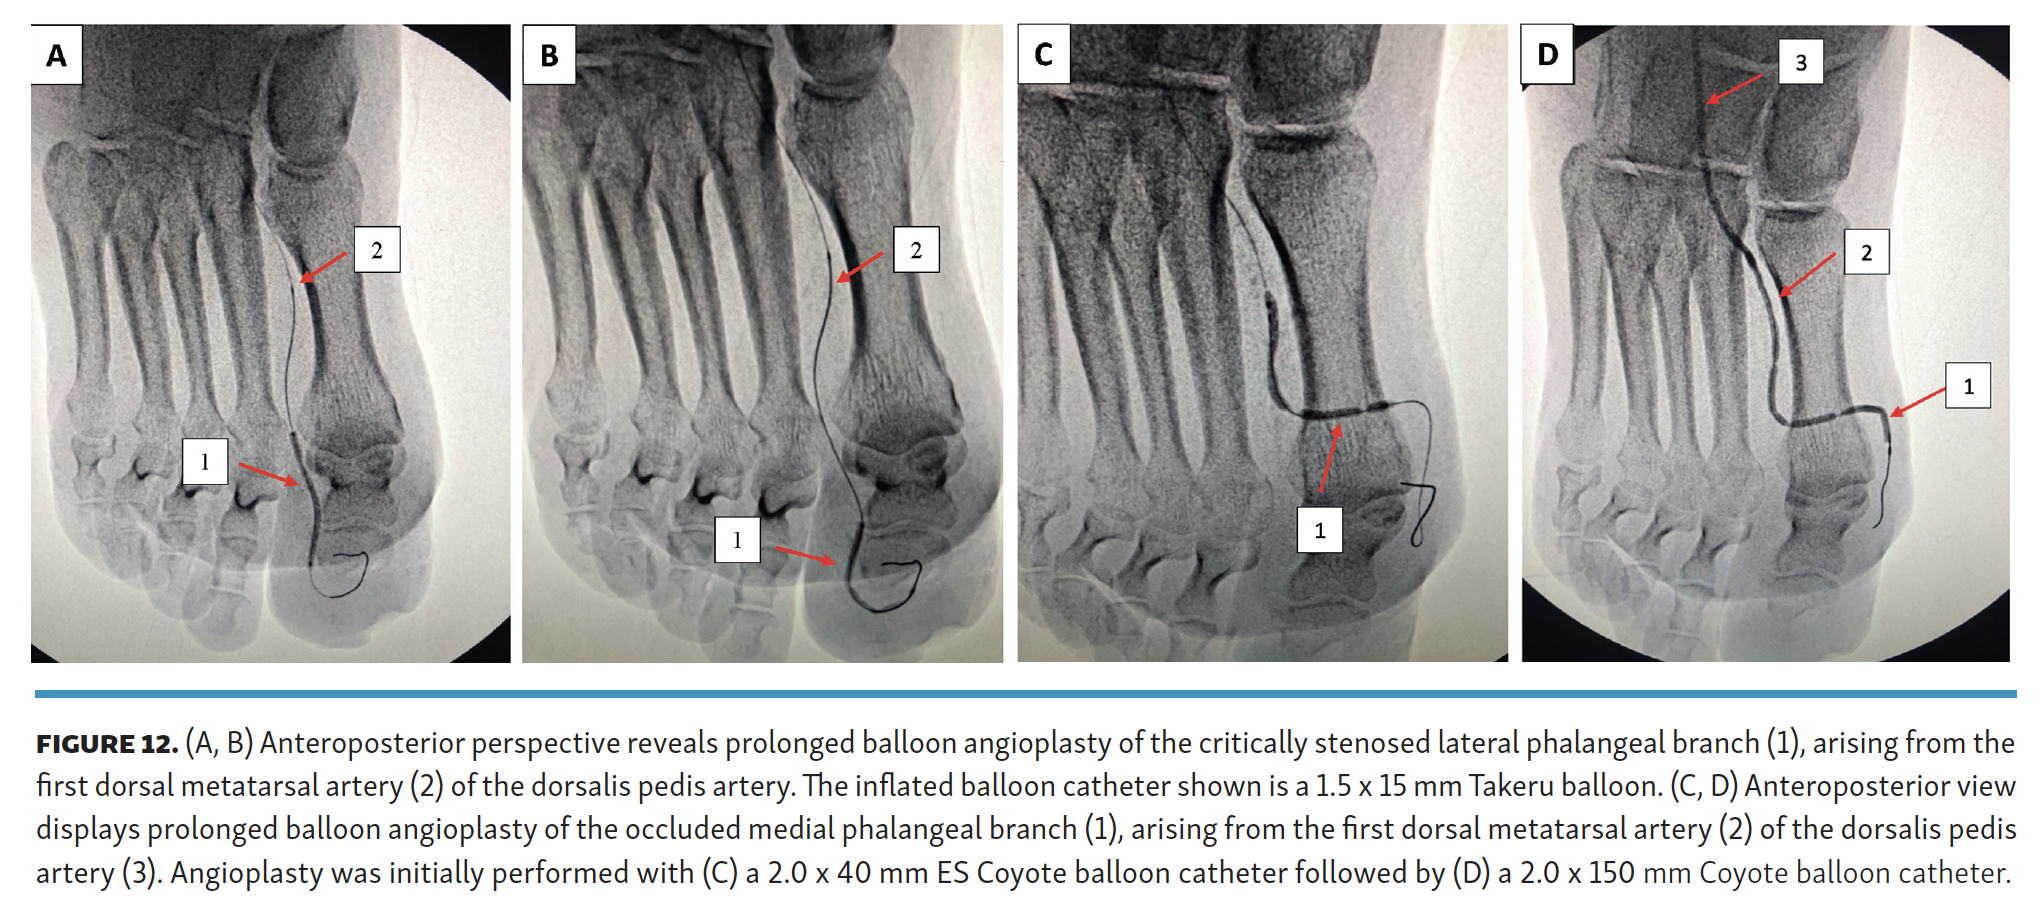 Pyon Impact of Performing  Lower-Extremity Angiographic Intervention Beyond the Pedal Plantar Loop FIg 12